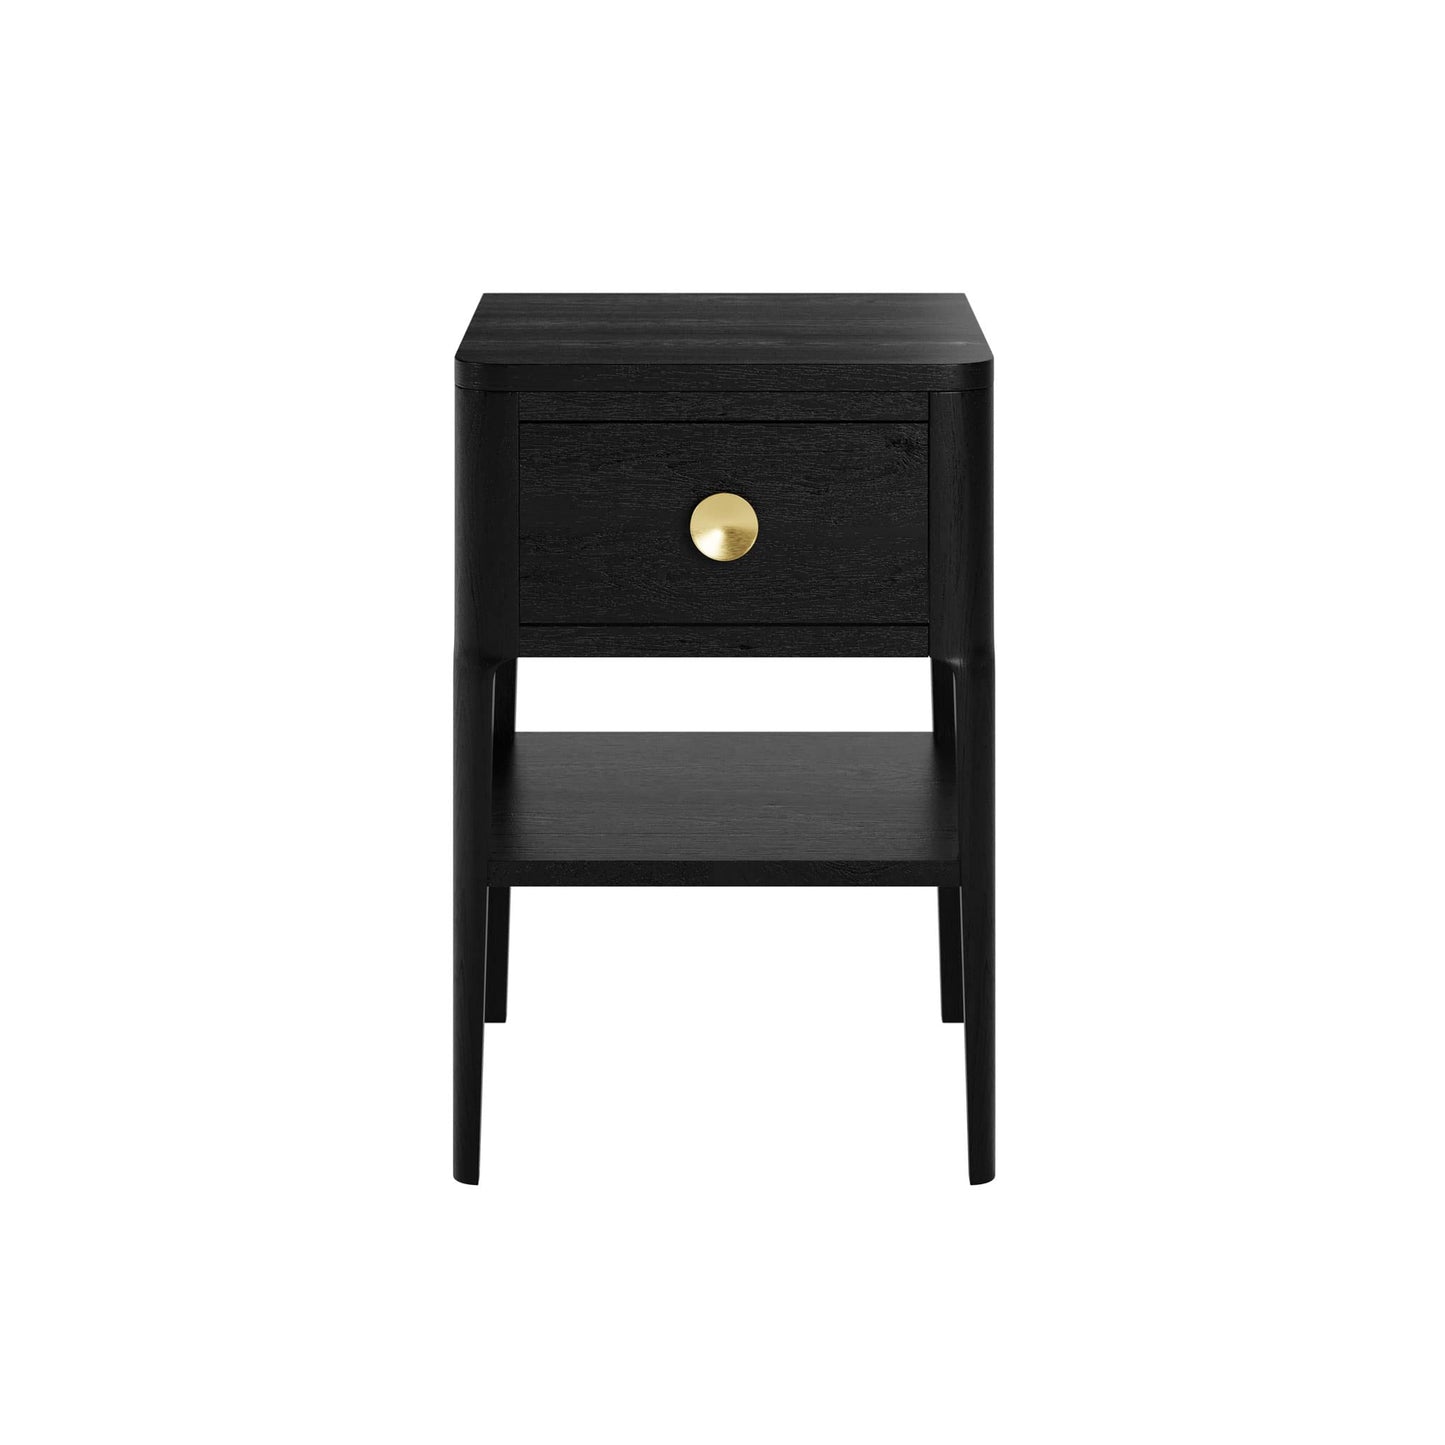 Black Abberley One Drawer Bedside Table